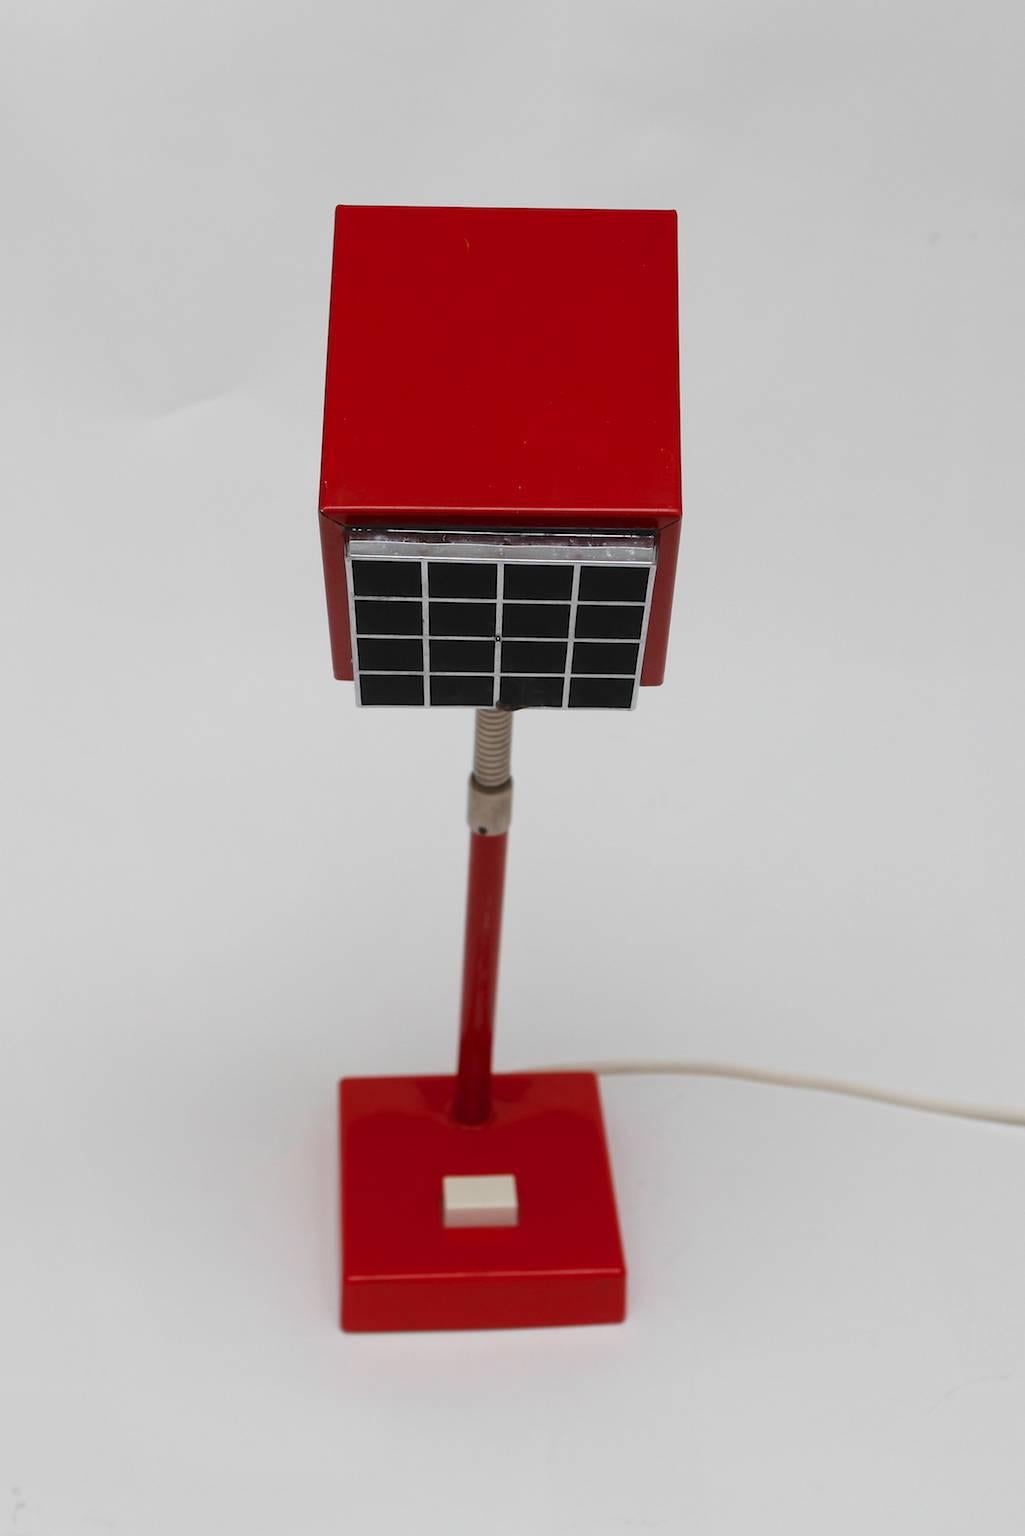 Red table lamp 'Elidus' by Hans-Agne Jakobsson, Markaryd, Sweden.
The grid in front of the bulb is removable (see images).
Full metal body, bendable neck. The size is 41 cm high and the foot is 10 x 11 cm.
We also have the same lamp in brown.